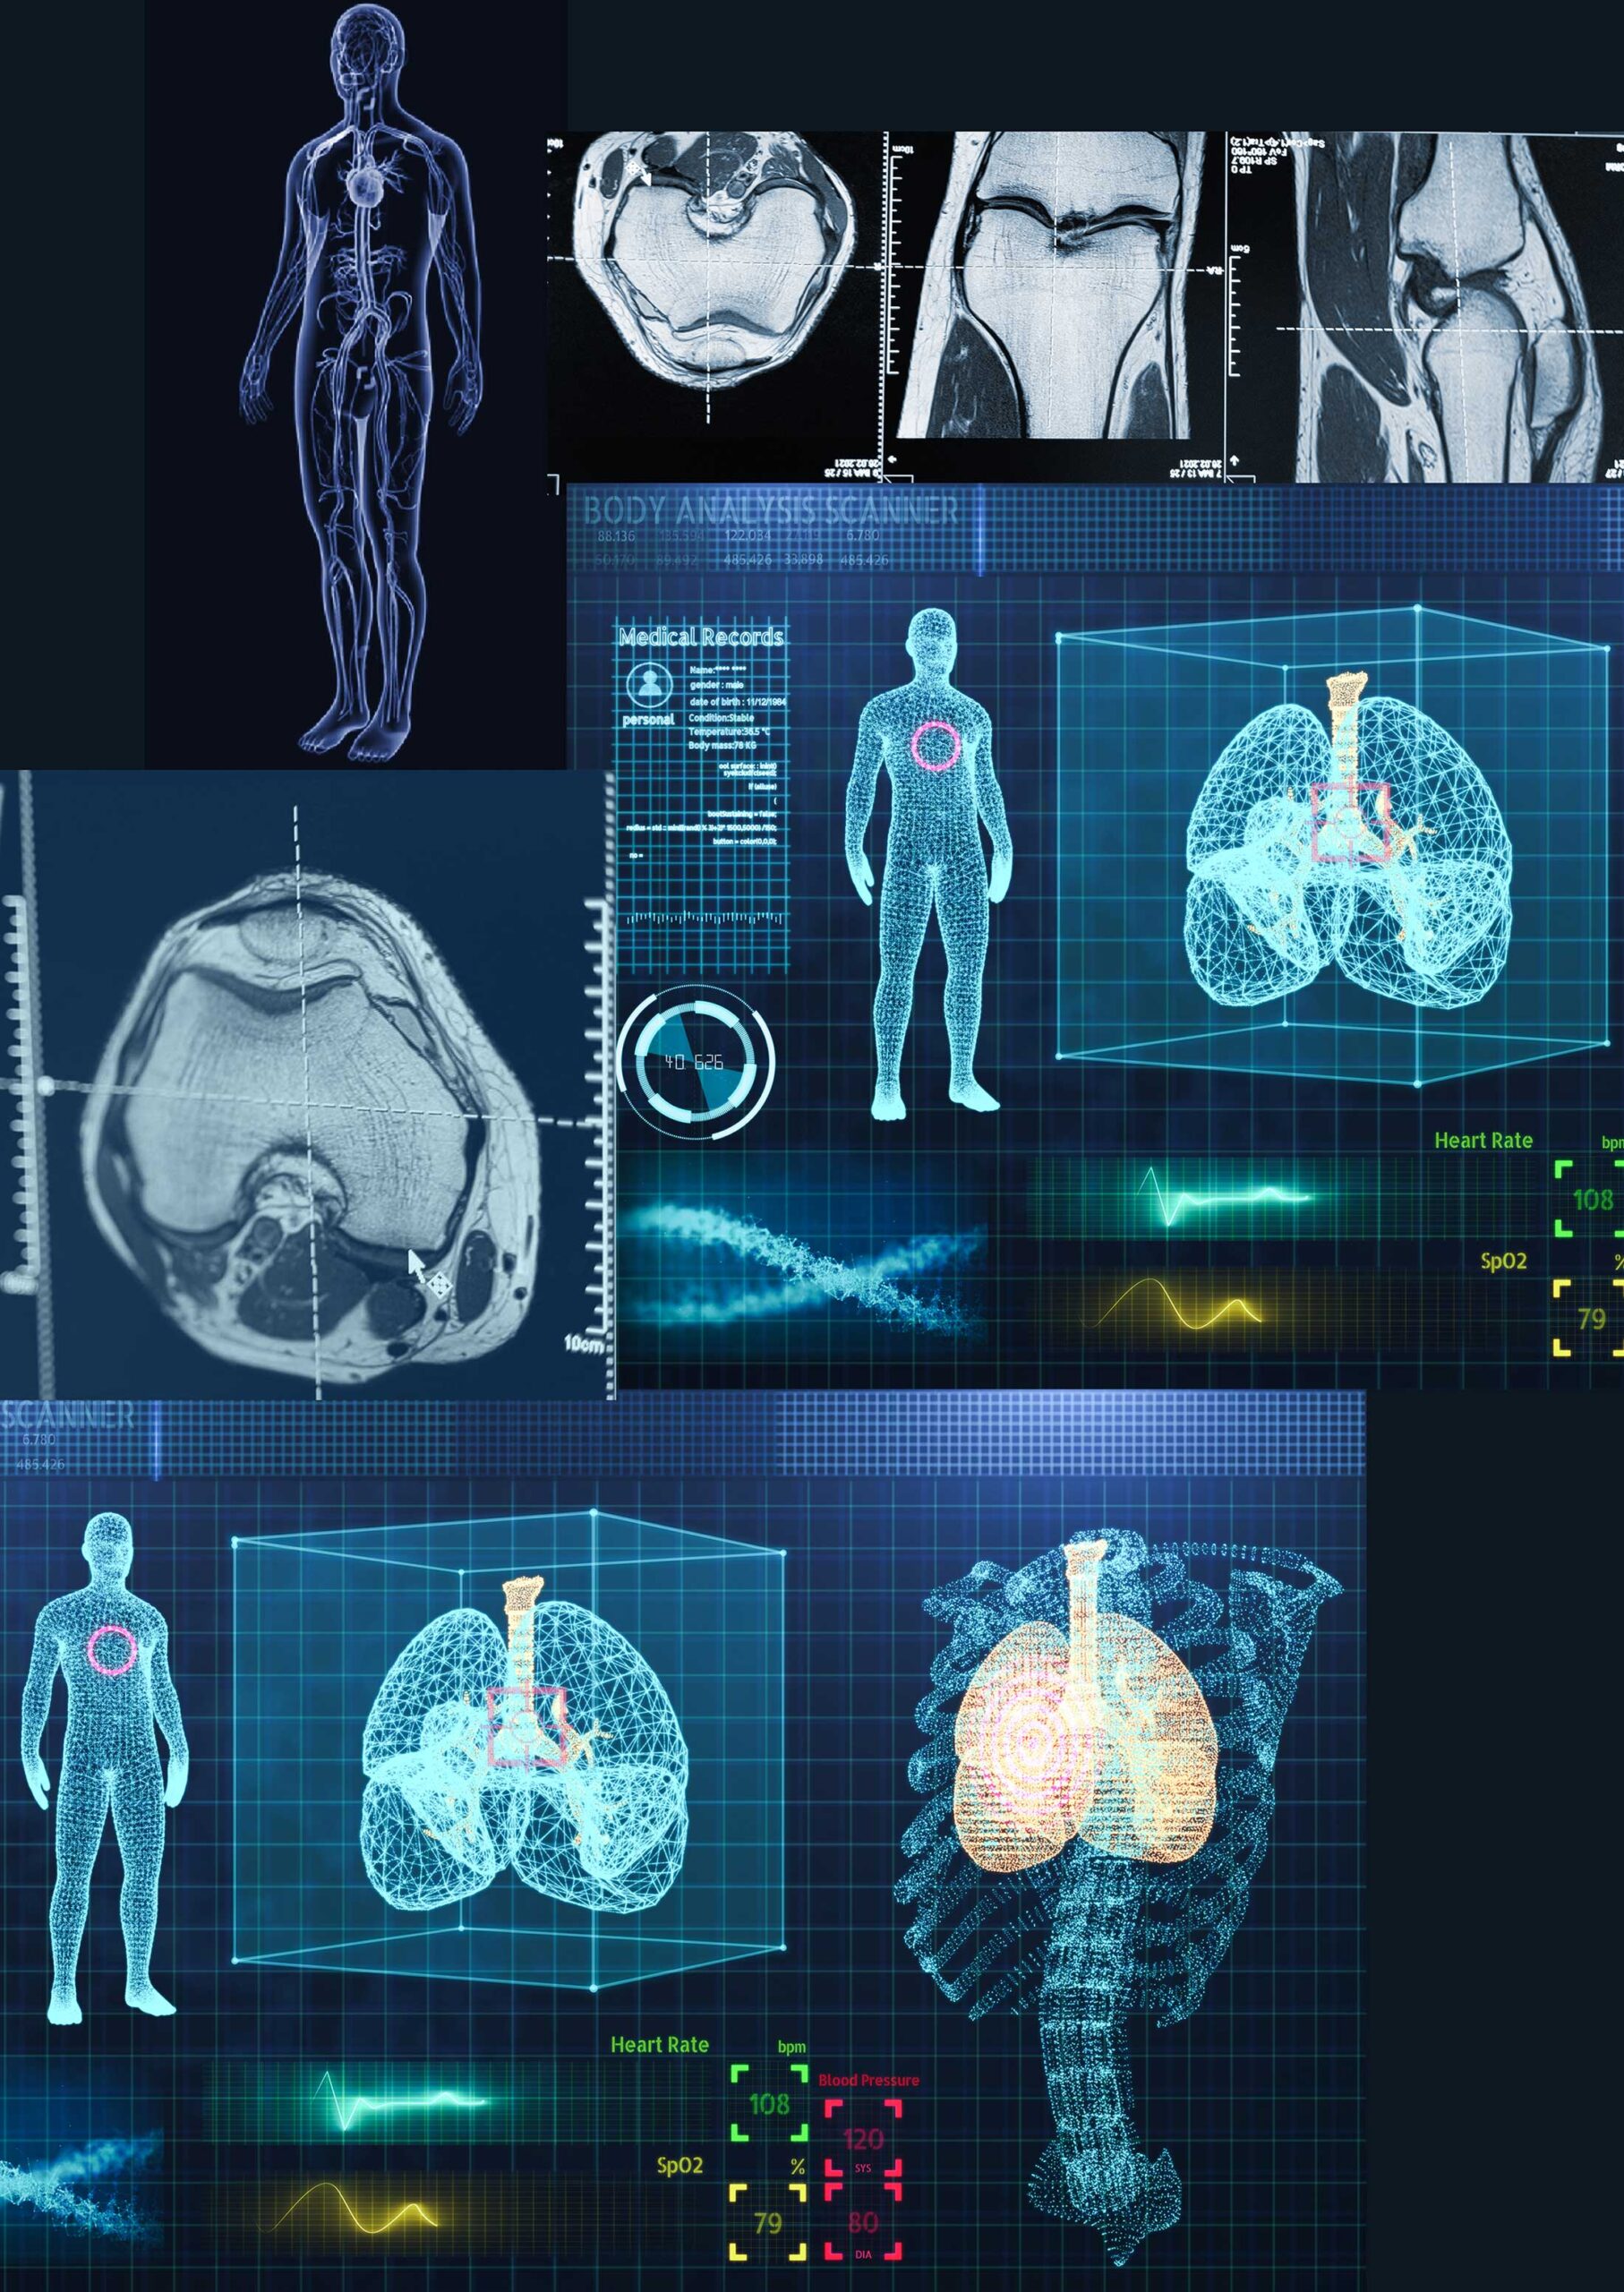 X-ray images of various body parts and organs